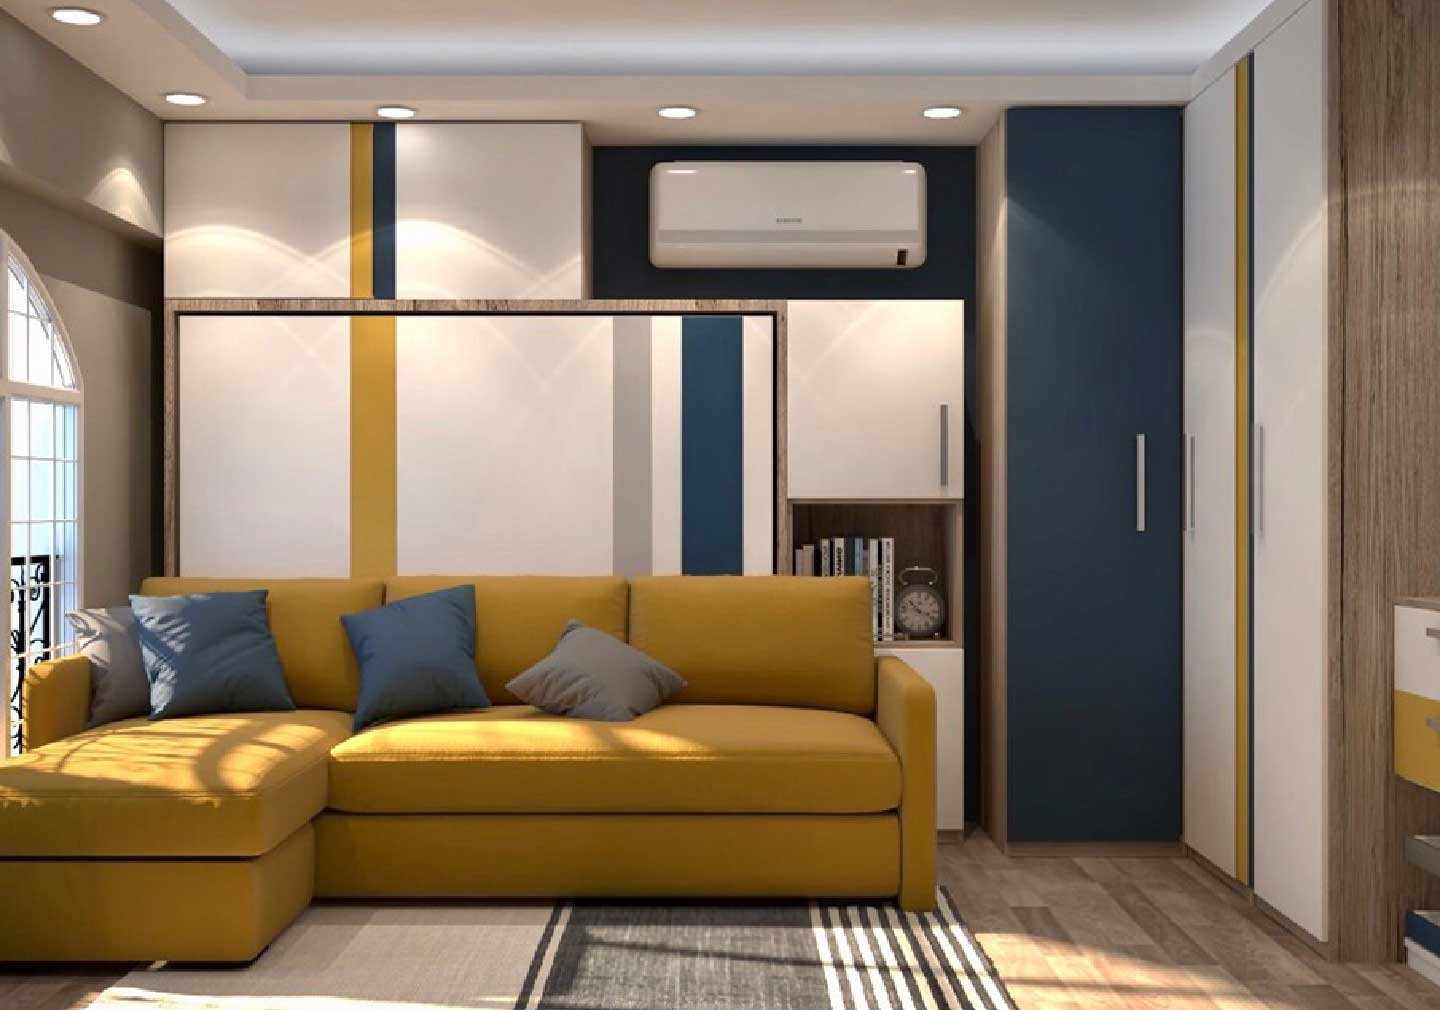 Utilizing Clever Storage Solutions for 2bhk interiors